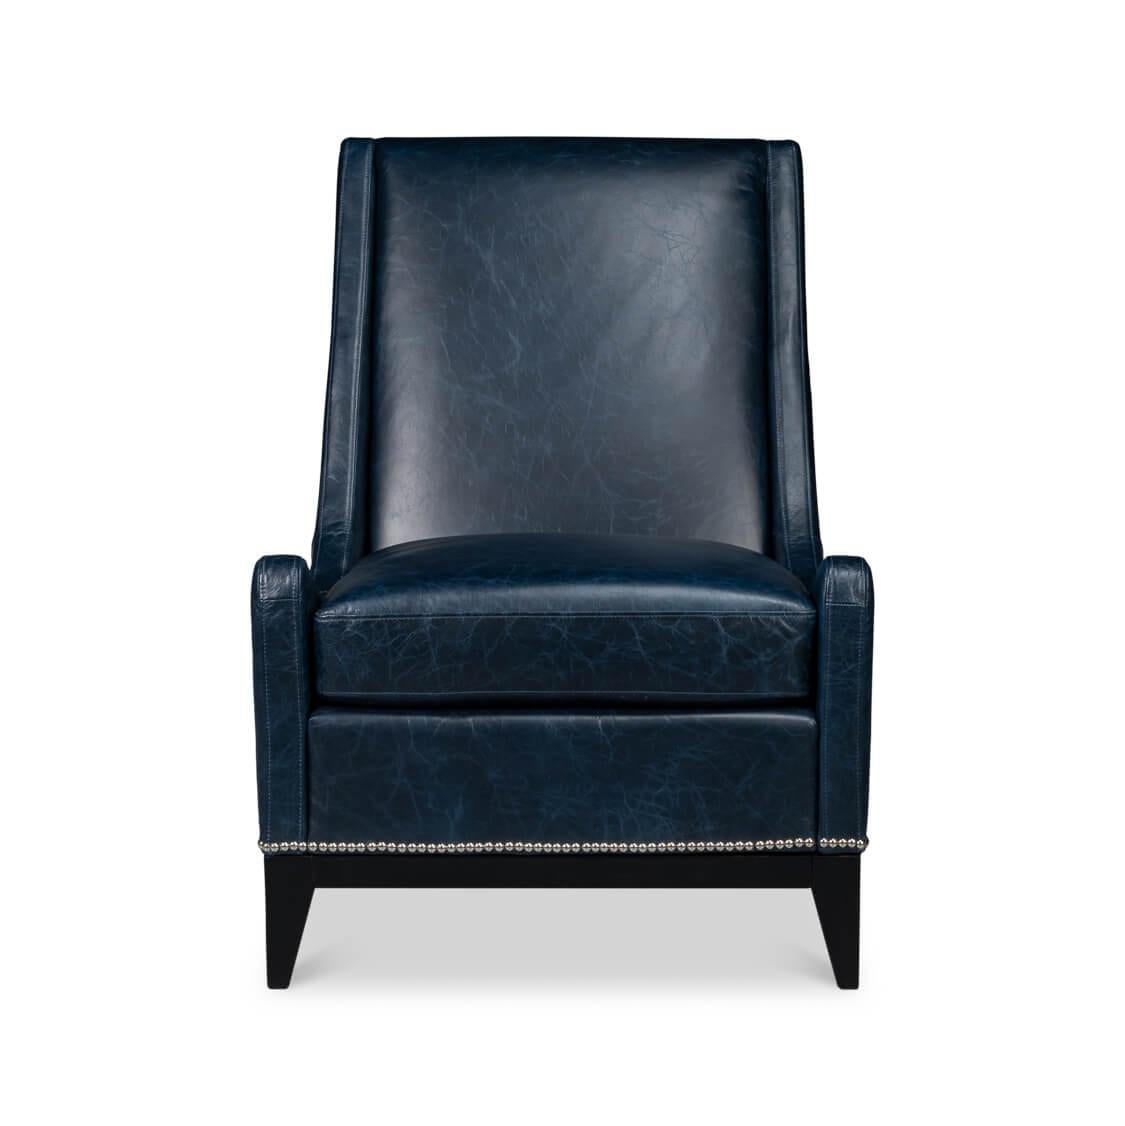 Crafted with meticulous attention to detail, this chair features supple top-grain leather that beckons you to sit and unwind. The bold Chateau Blue leather is beautifully complemented by the classic nailhead trim, exuding a sense of luxury and